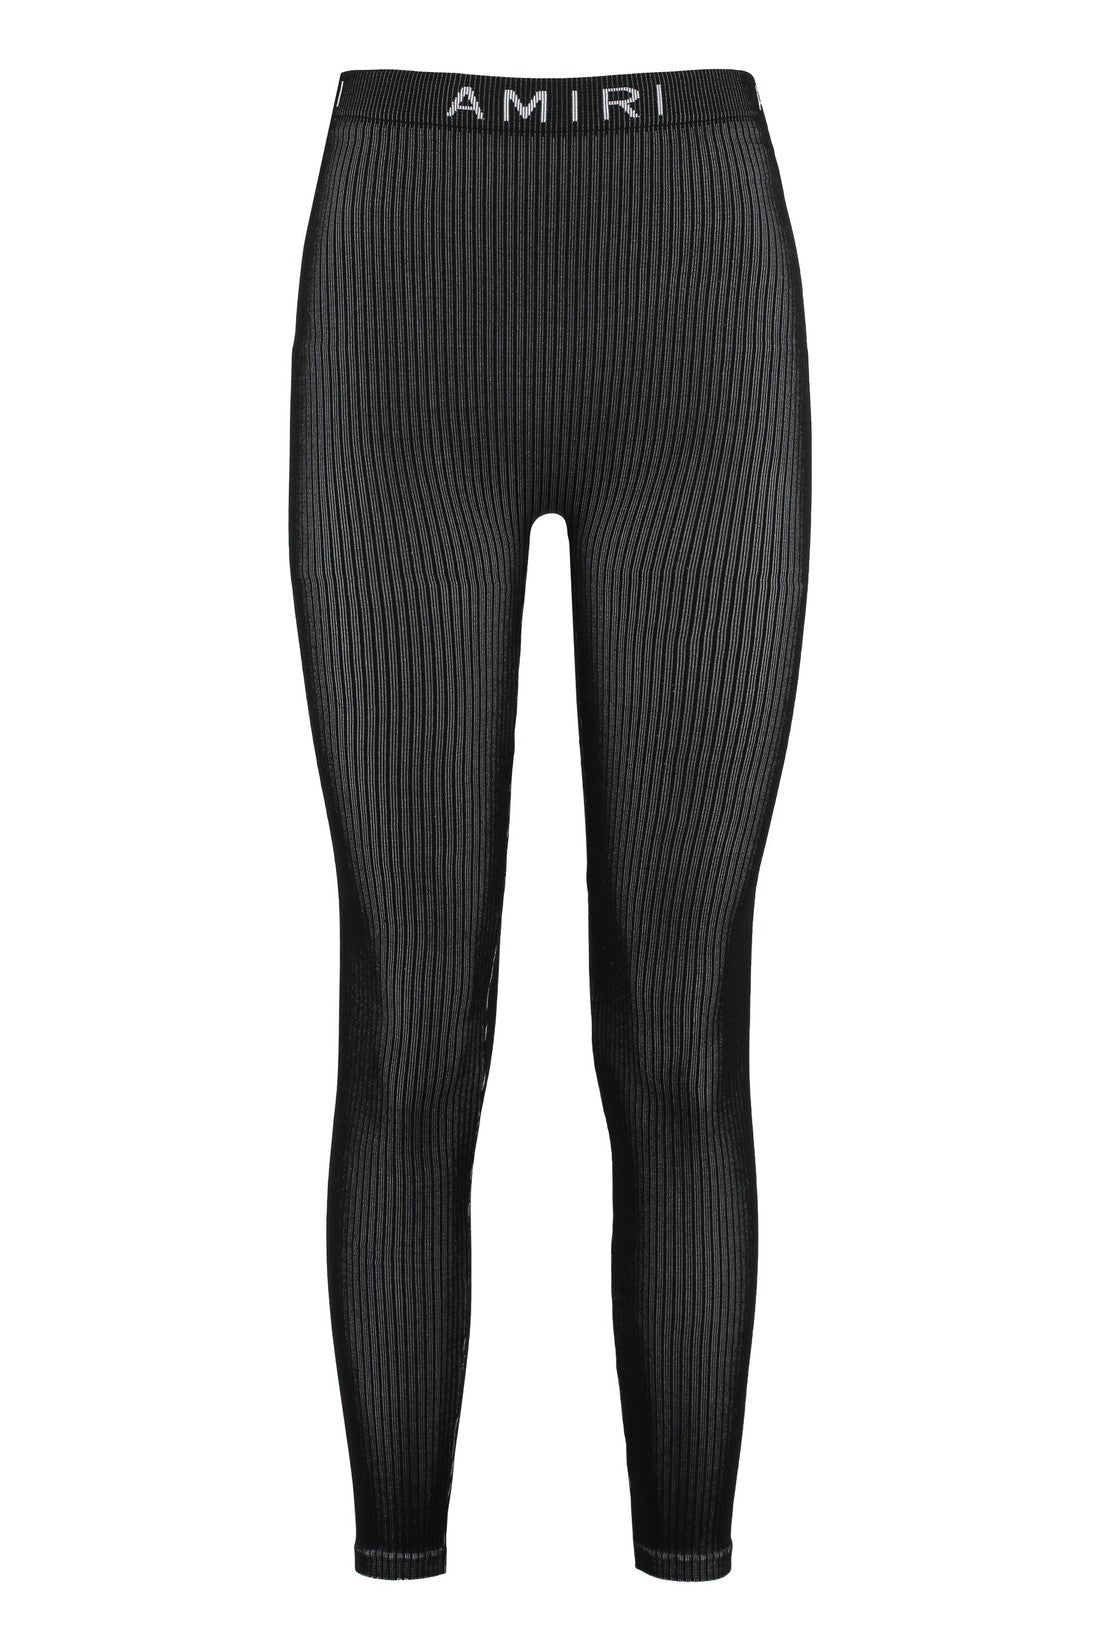 AMIRI-OUTLET-SALE-Ribbed stretch leggings-ARCHIVIST